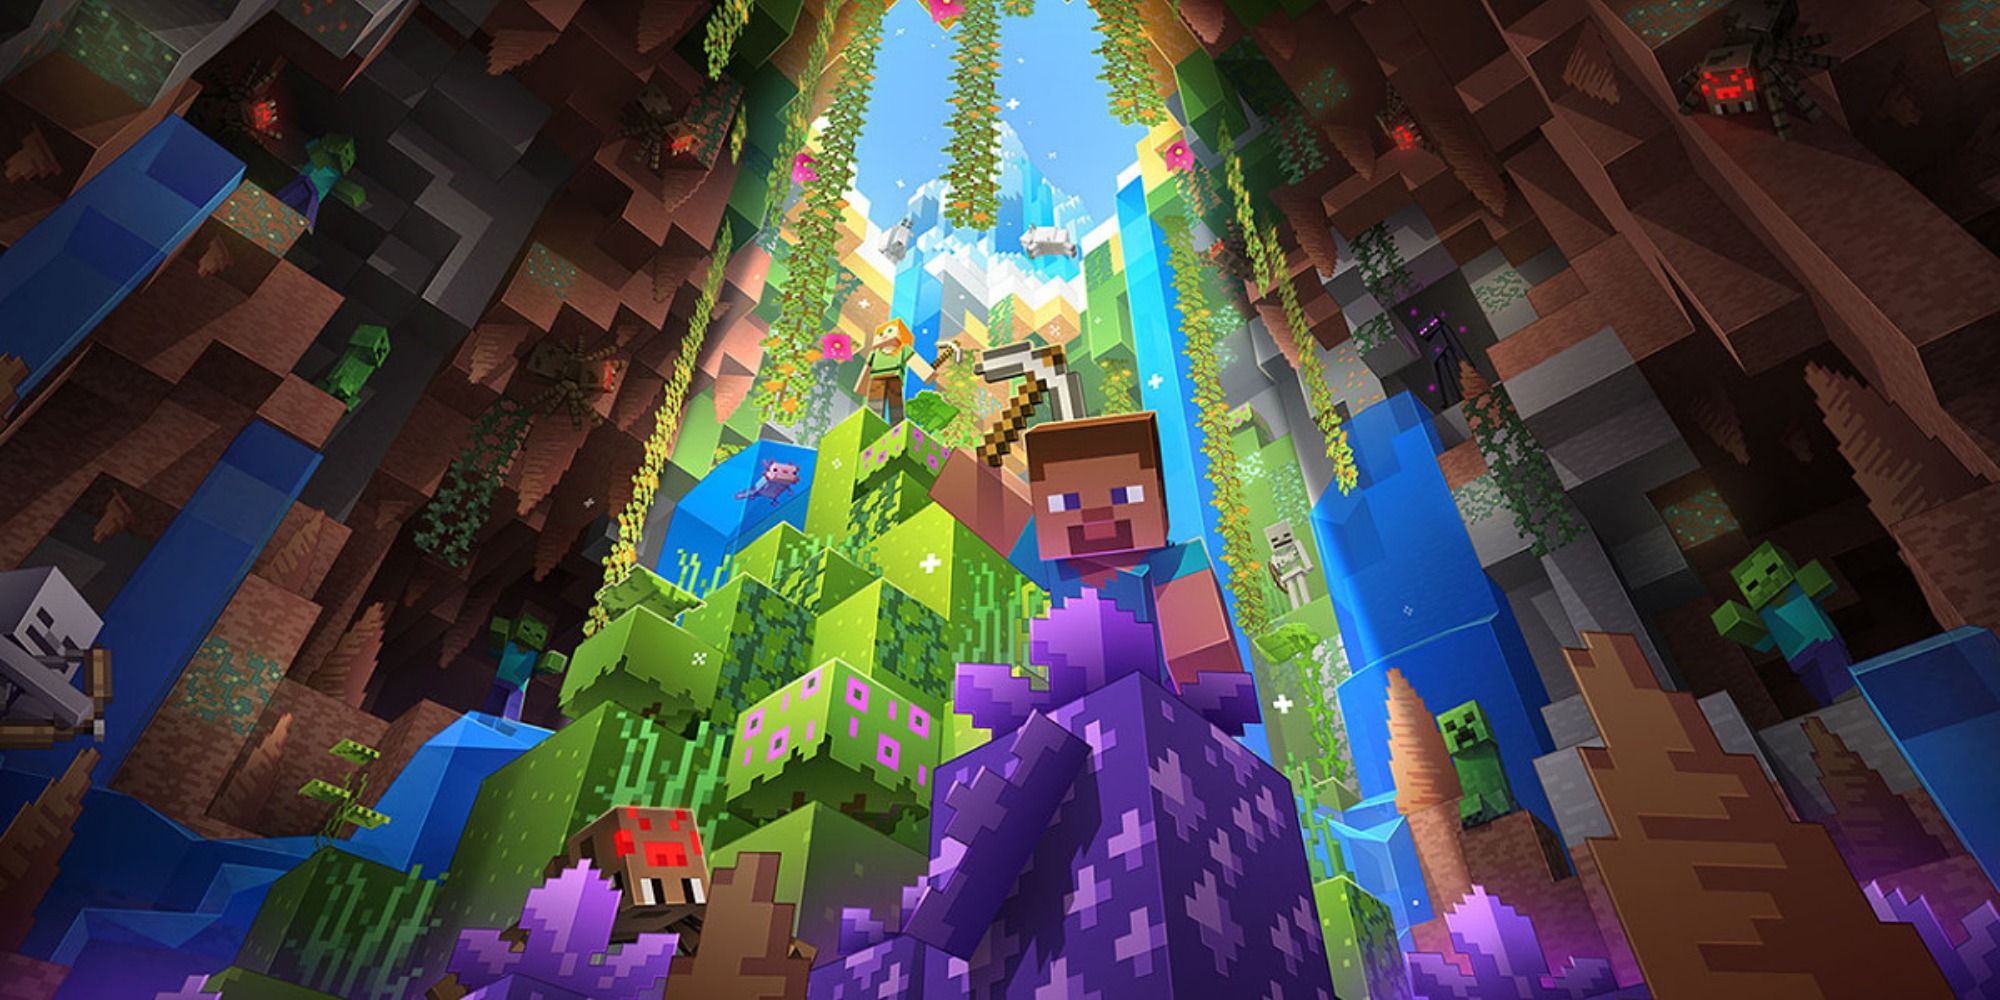 Minecraft Steve mines in a lush cave biome, while enemies approach from around him